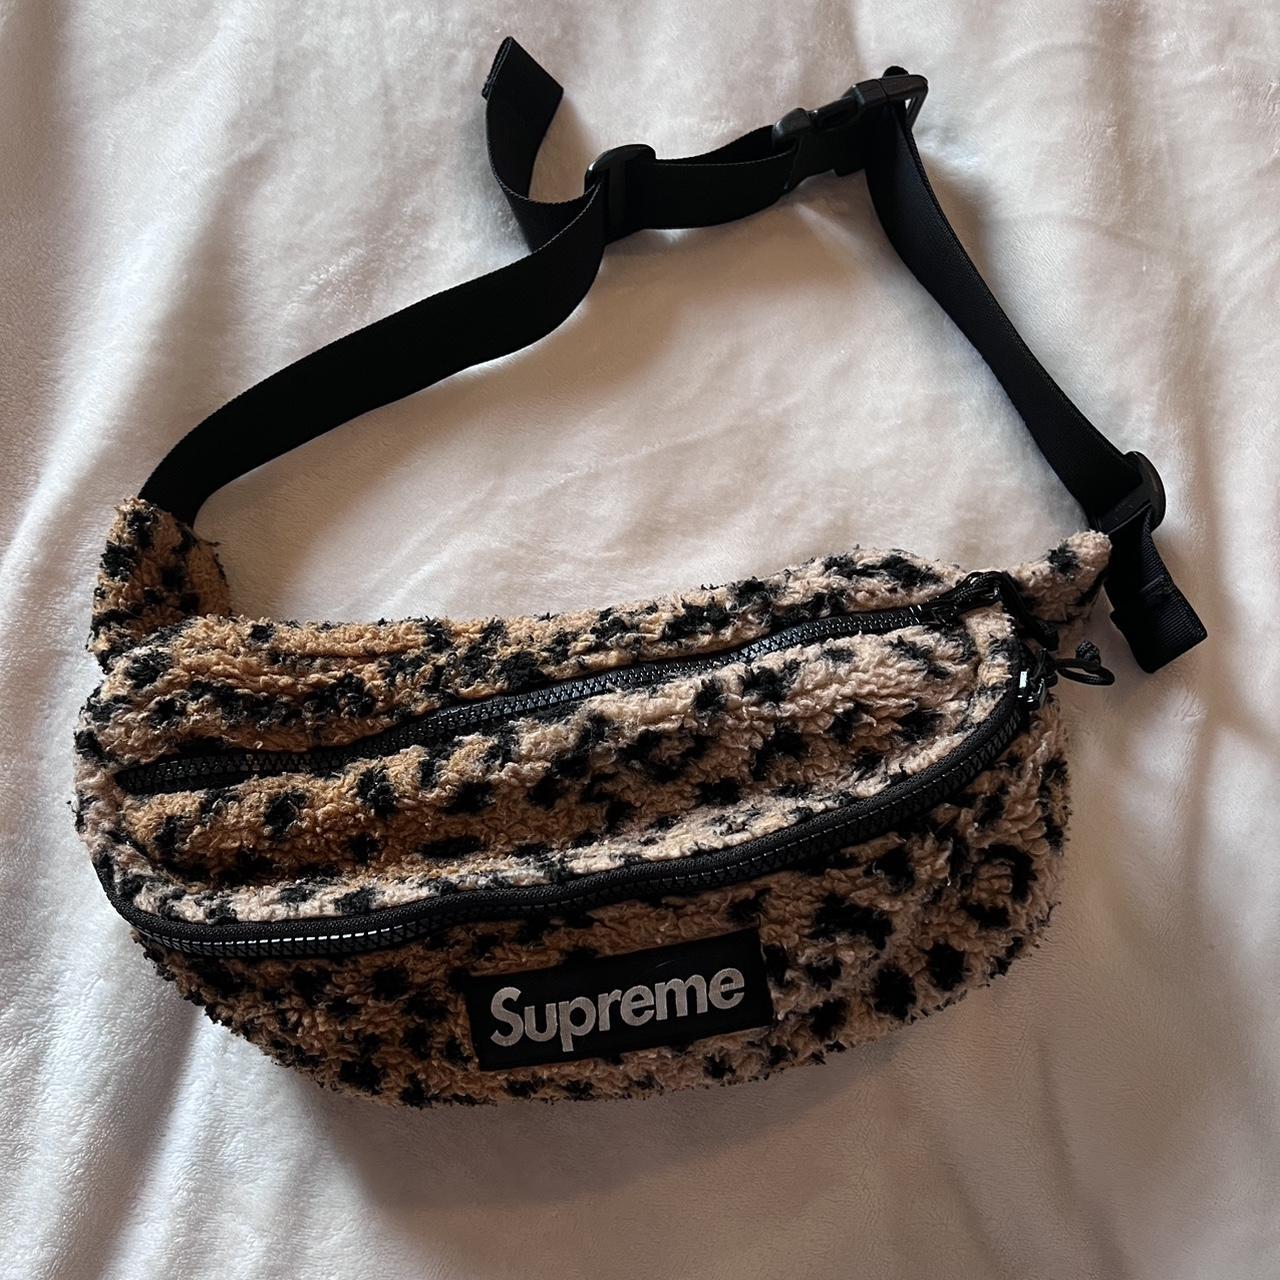 Supreme Leopard Fanny Pack, great condition.